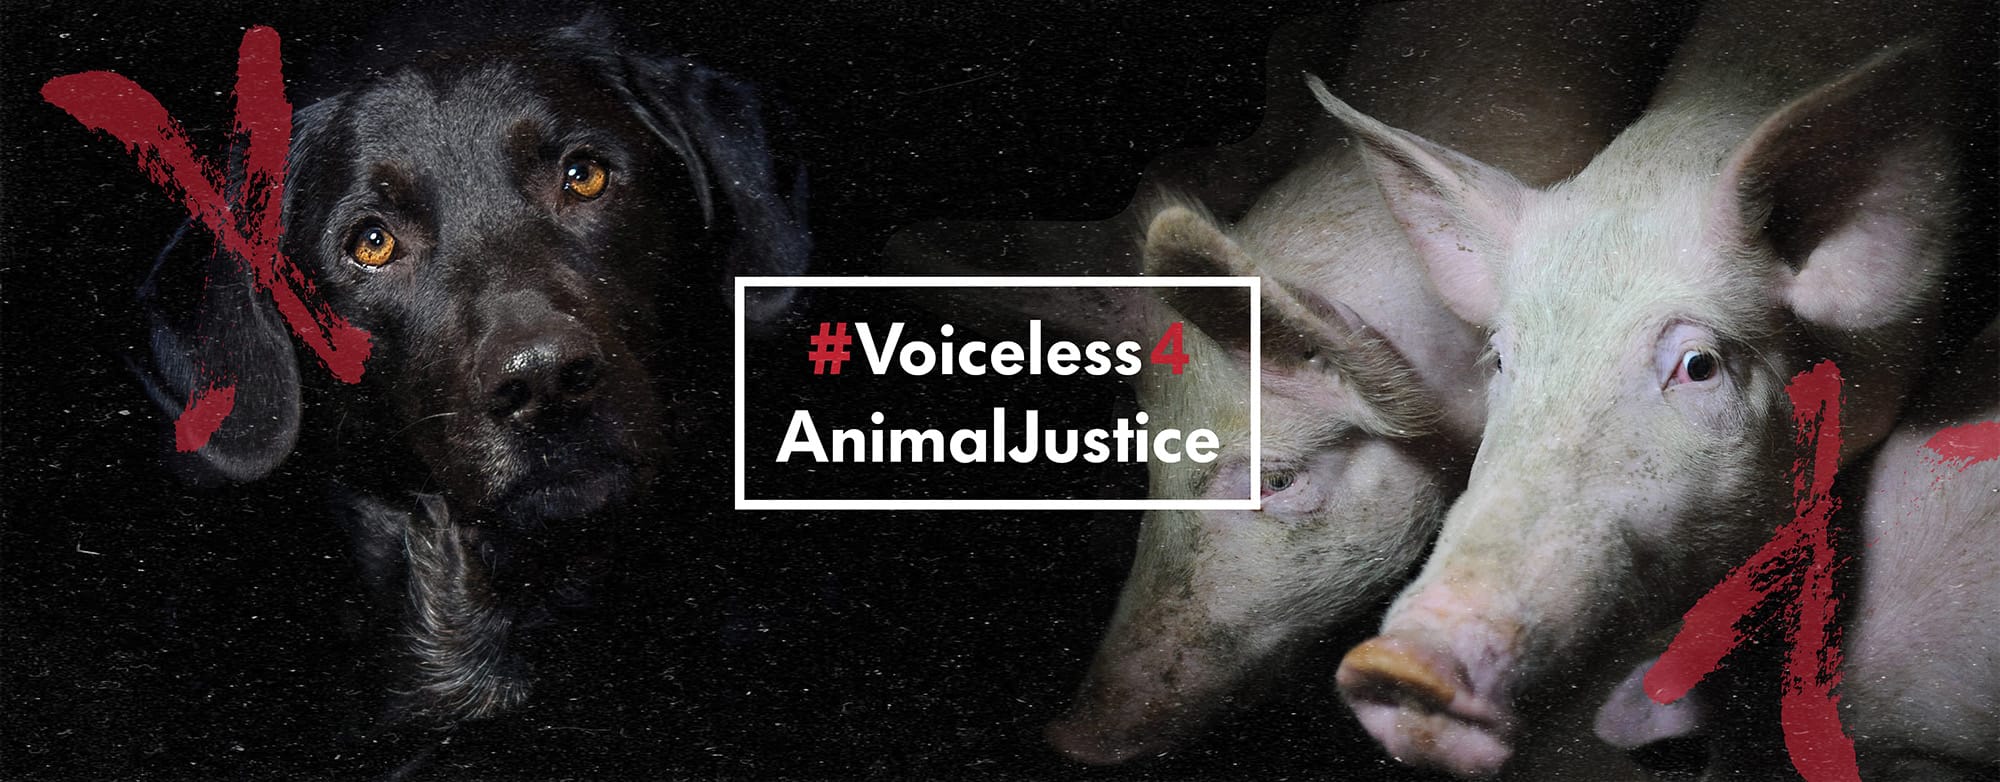 #Voiceless4AnimalJustice 2019 Raises Over $26,000 for Animal Protection